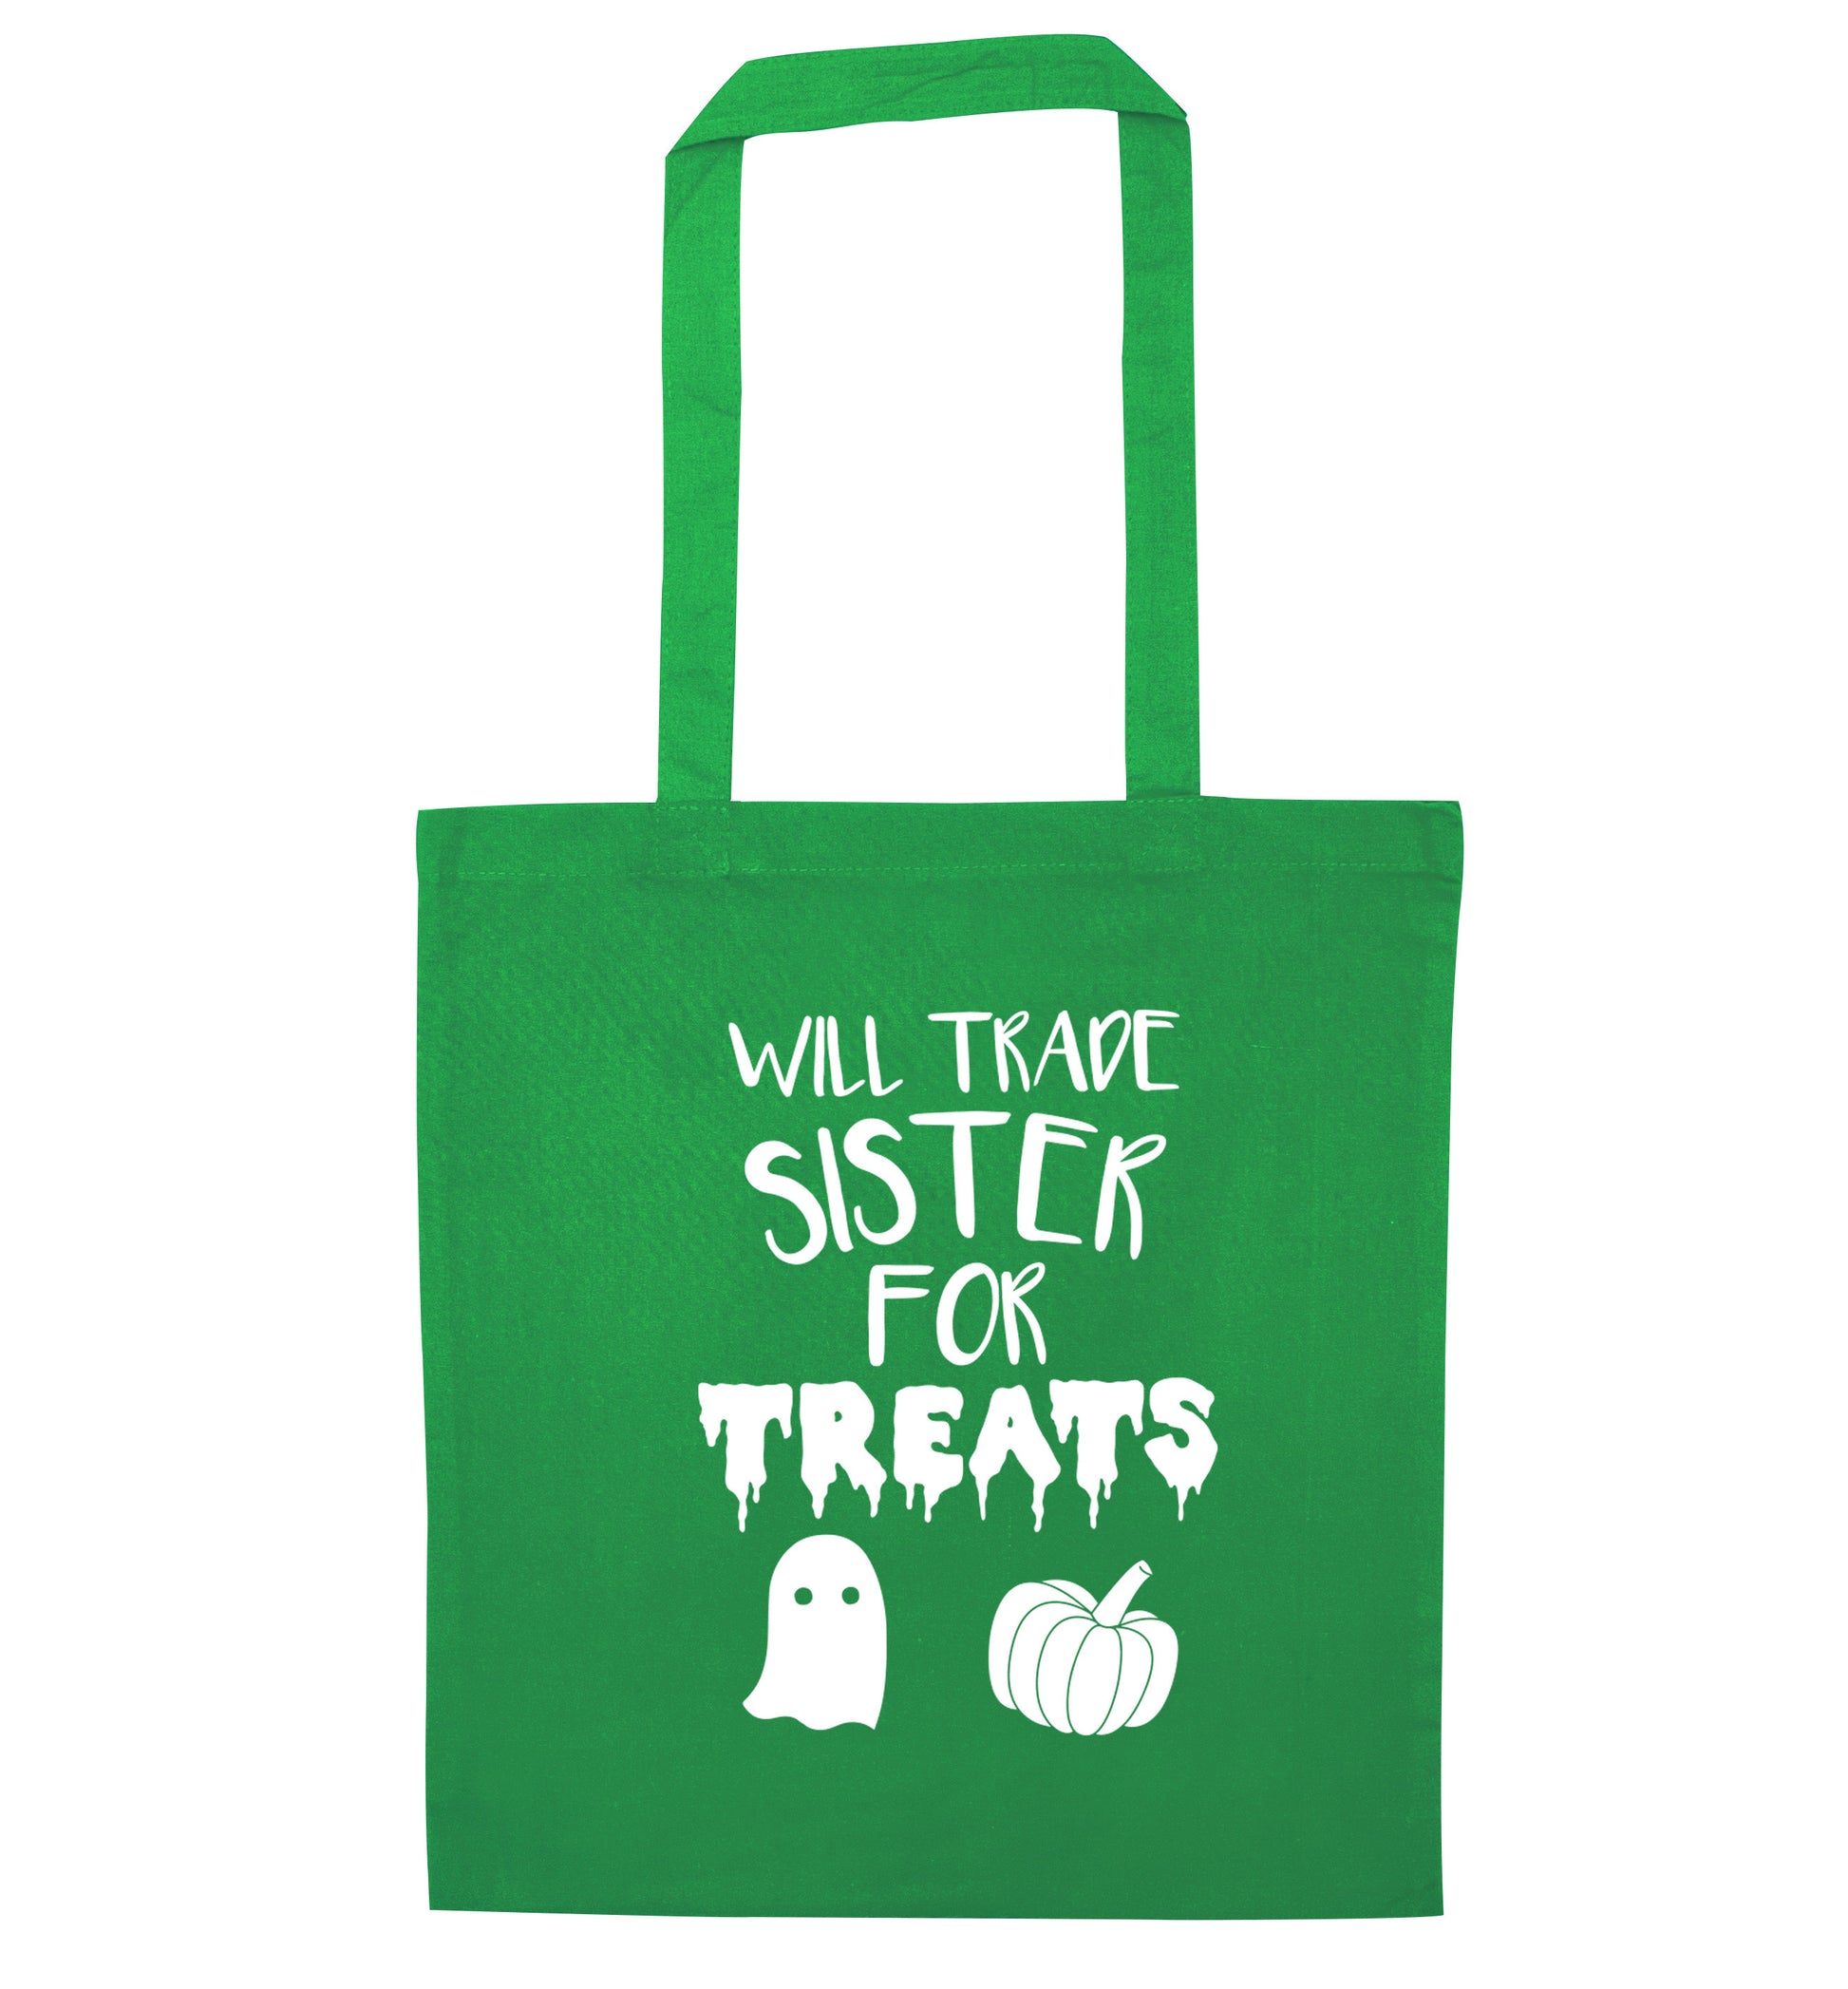 Will trade sister for treats green tote bag